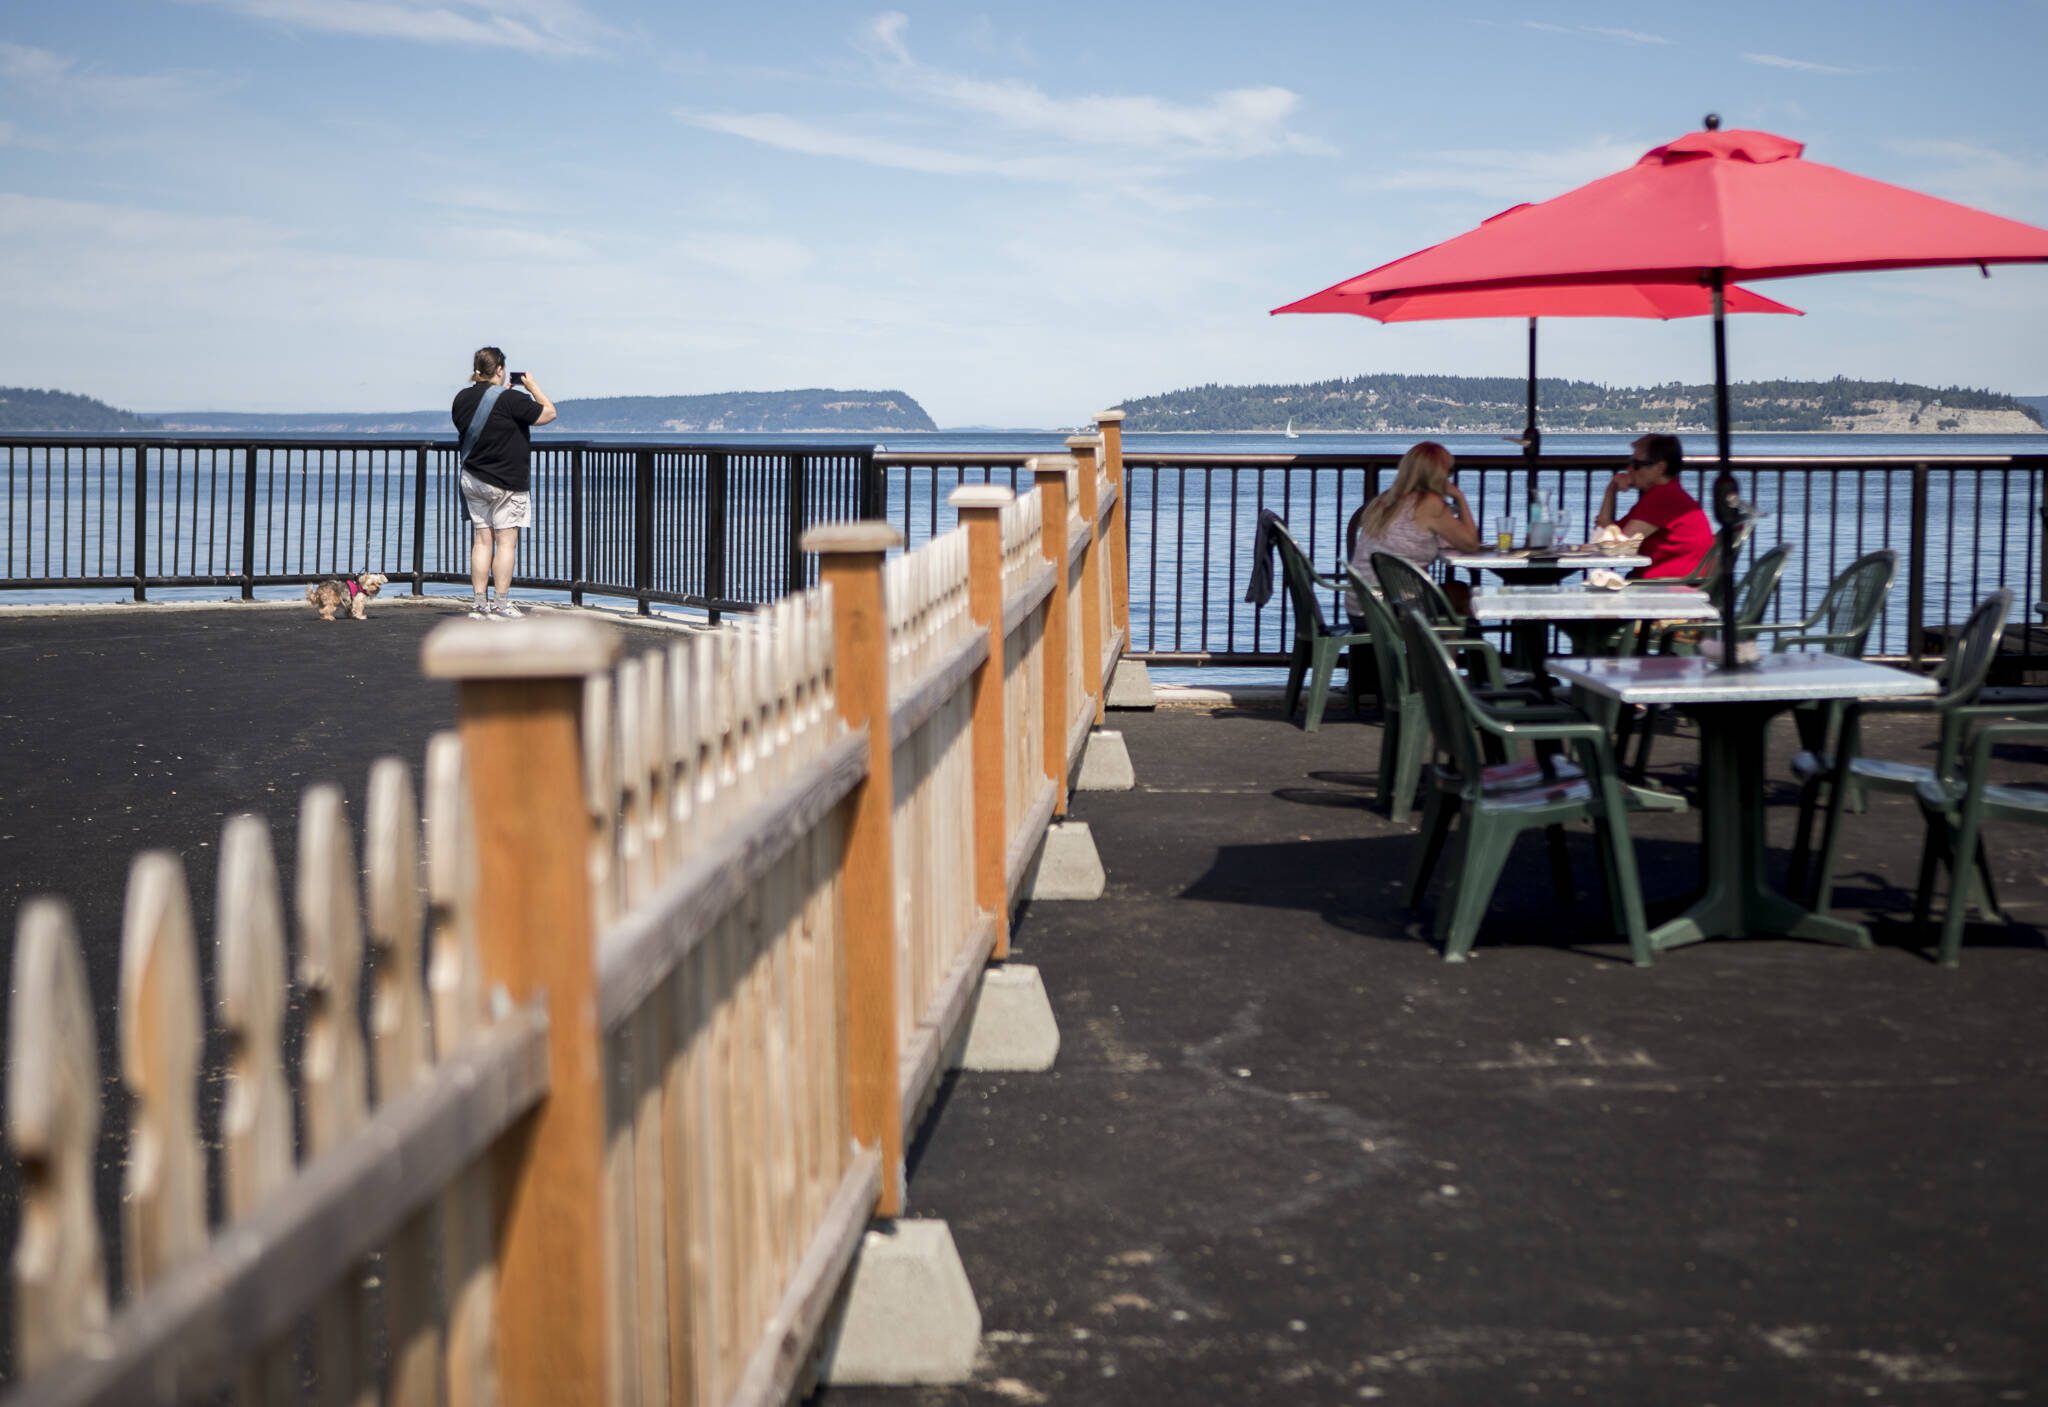 A person takes a photograph of the water from the new parklet while people dine at the new table additions at the parklet for Ivar’s on Thursday, Aug. 5, 2021 in Mukilteo, Washington. (Olivia Vanni / The Herald)